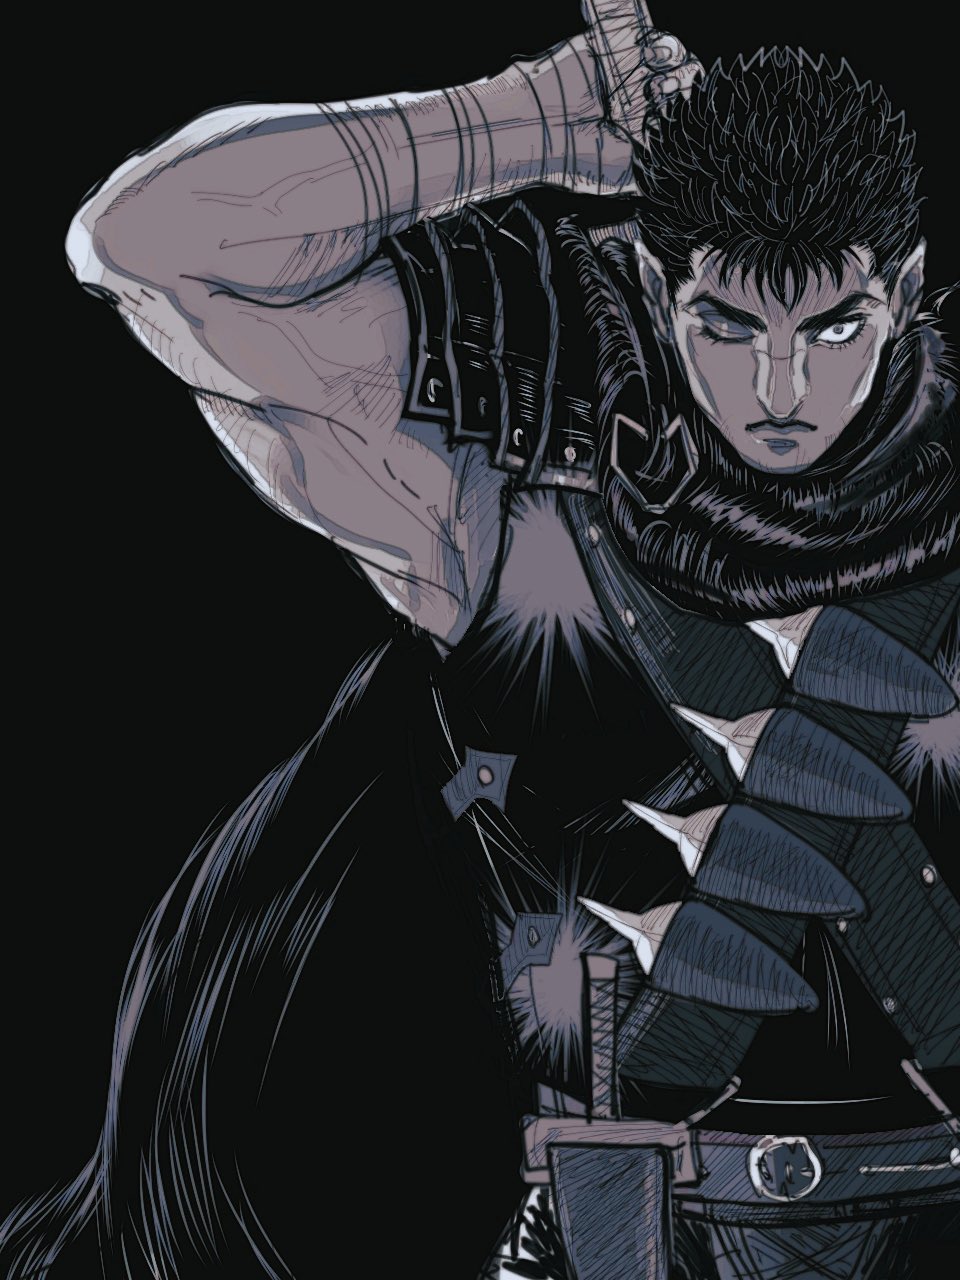 Daily Guts 𒌐 on X: The Berserk 1997 anime will be available to